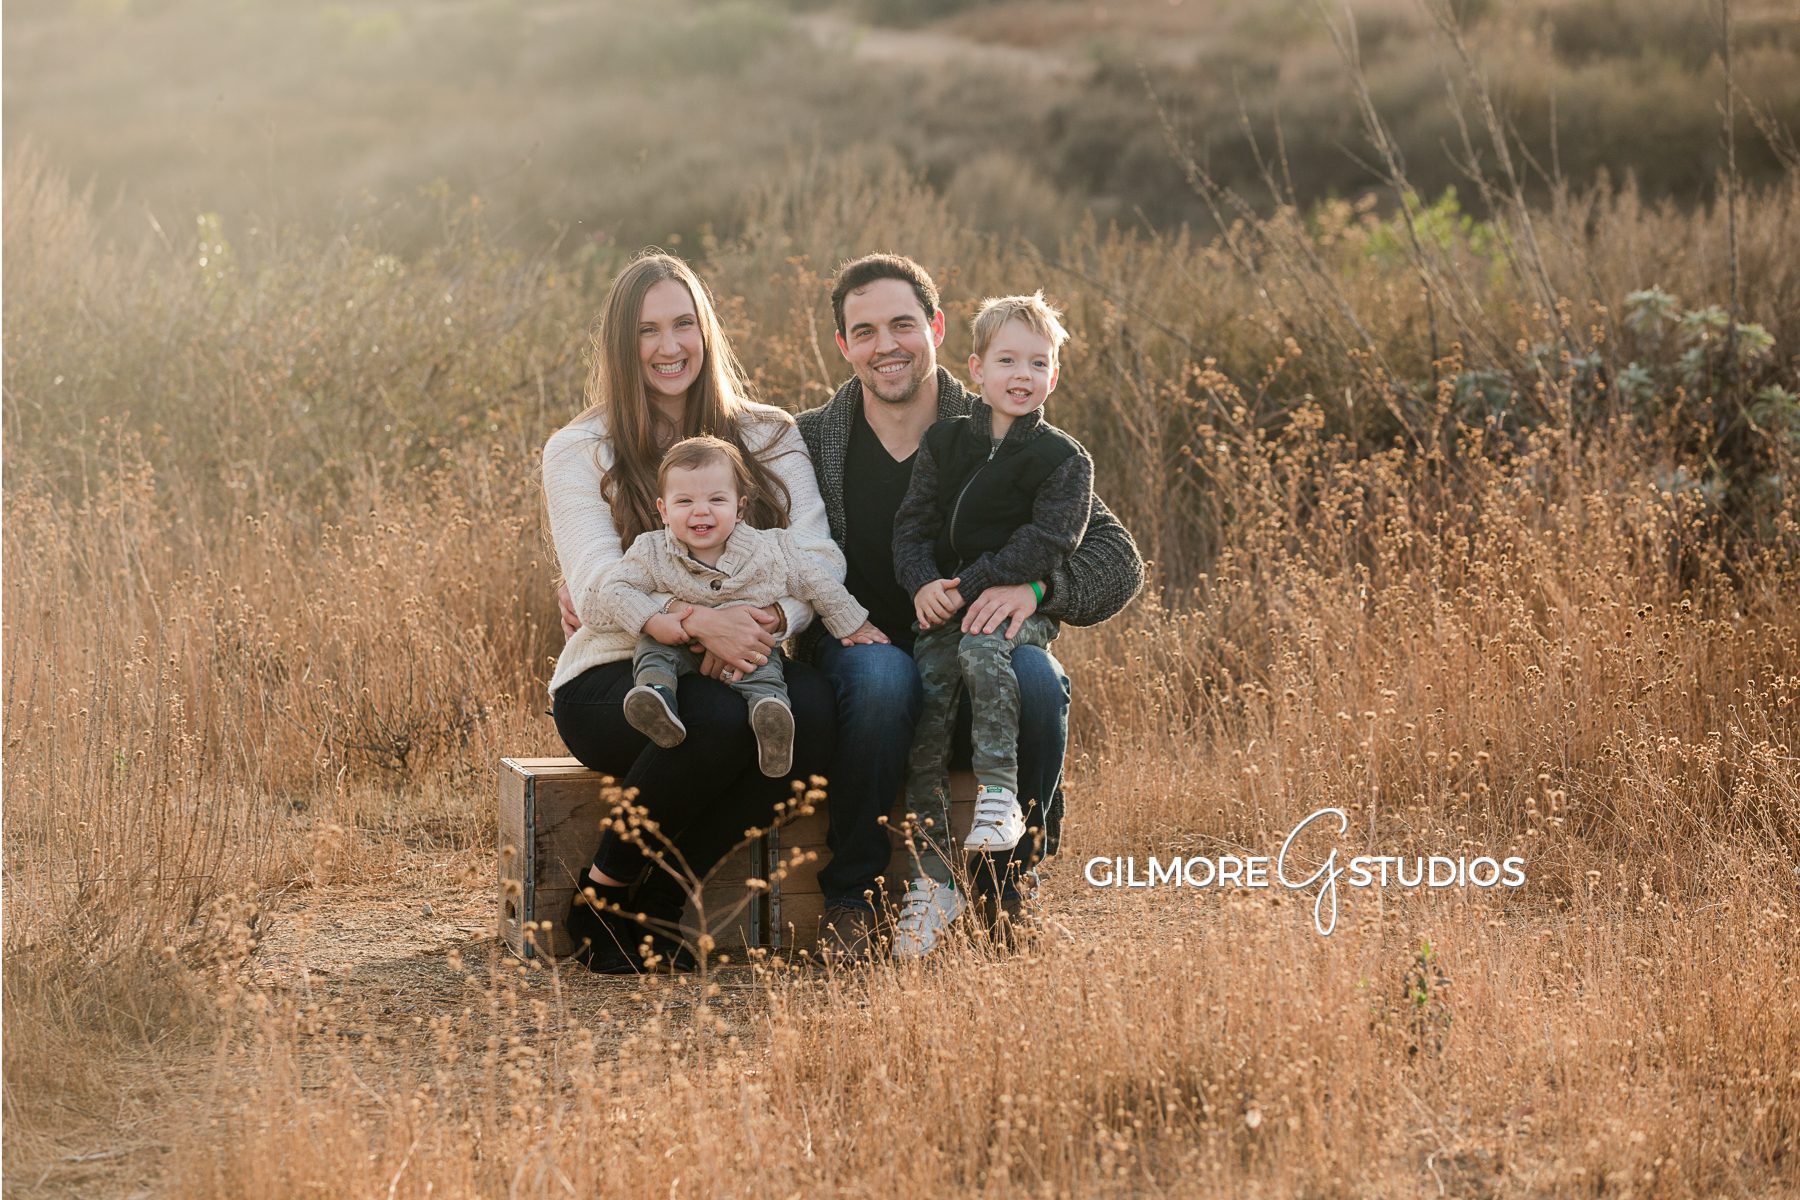 Family Mini Sessions in Newport Beach, Back Bay portrait photographer, children, families, outdoor locations, winter, fall, orange county, ca